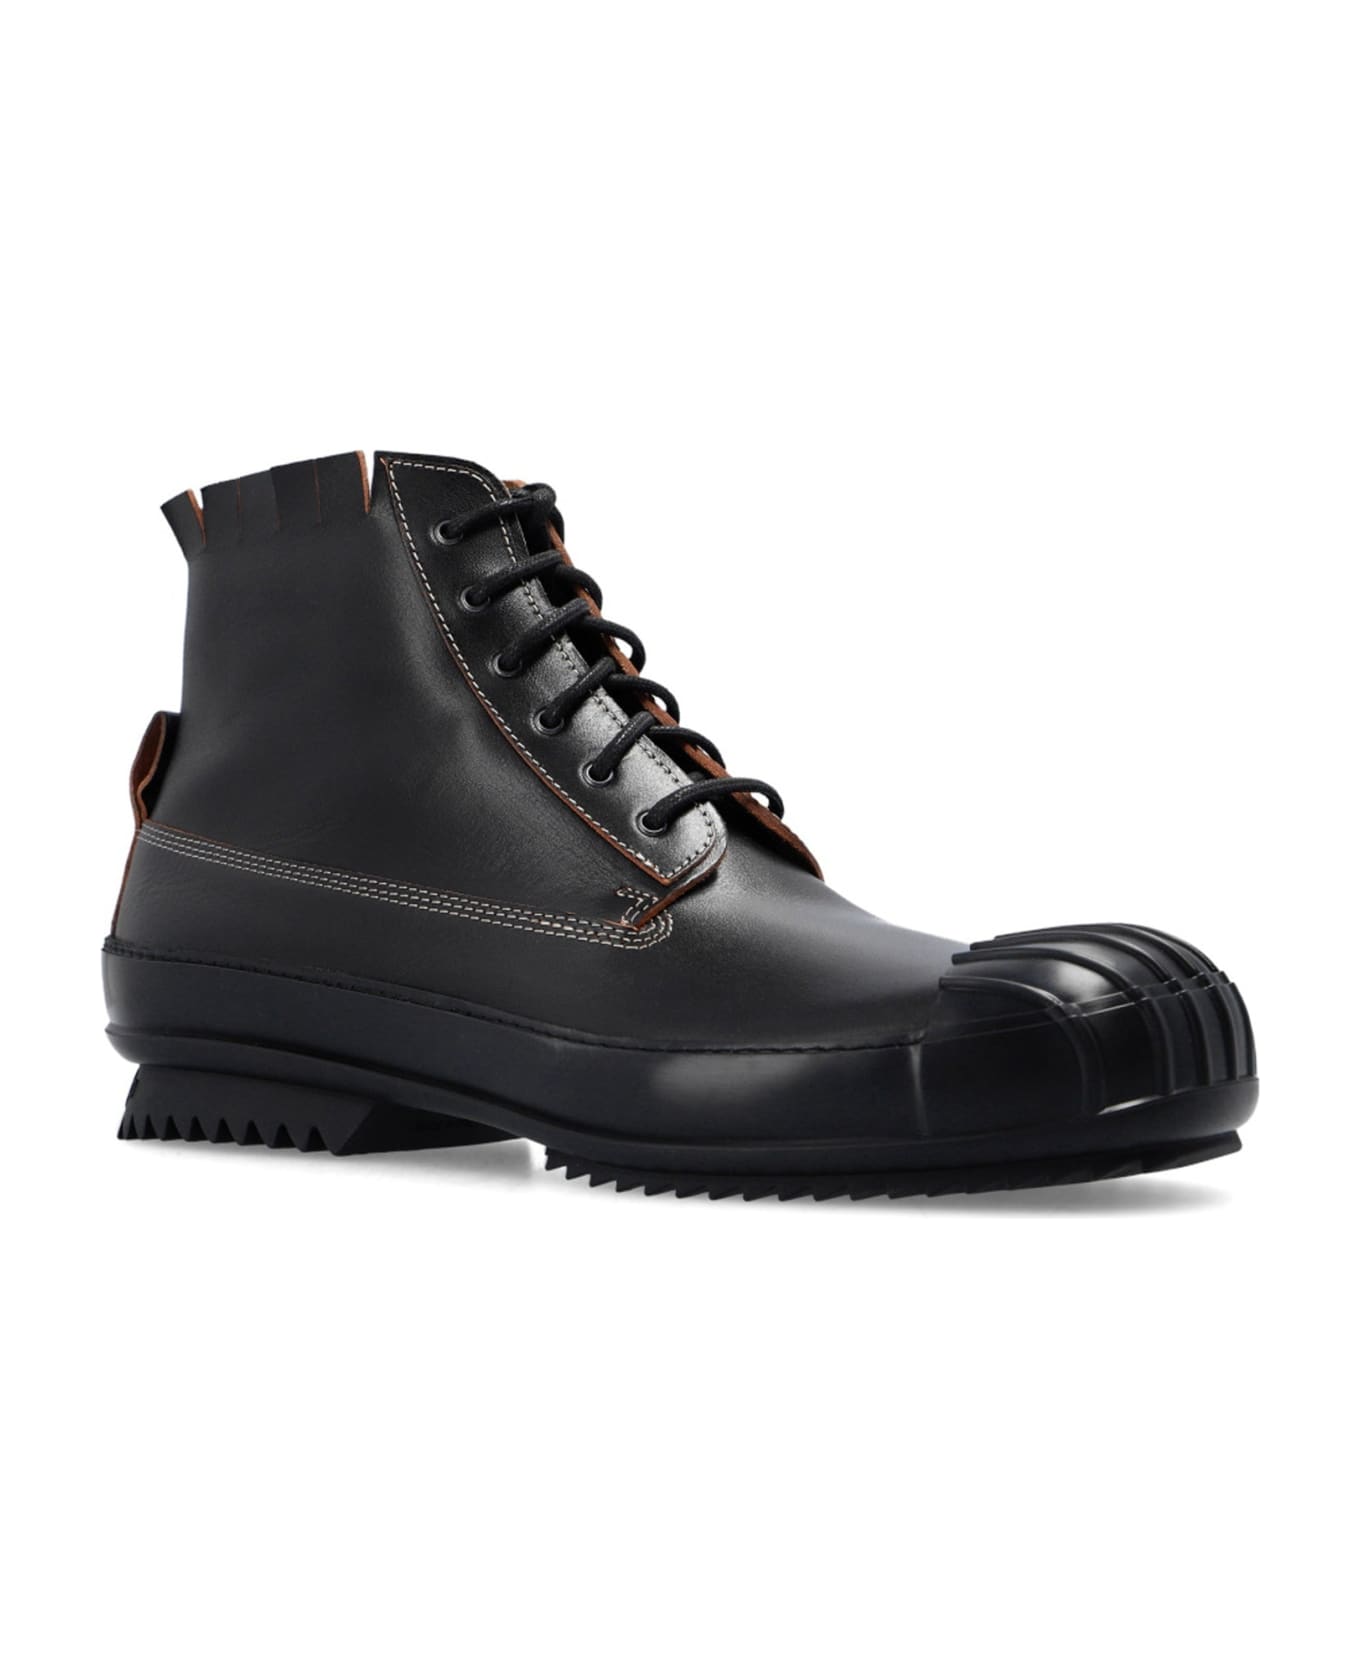 Maison Margiela Leather High-top Sneakers - Black ブーツ